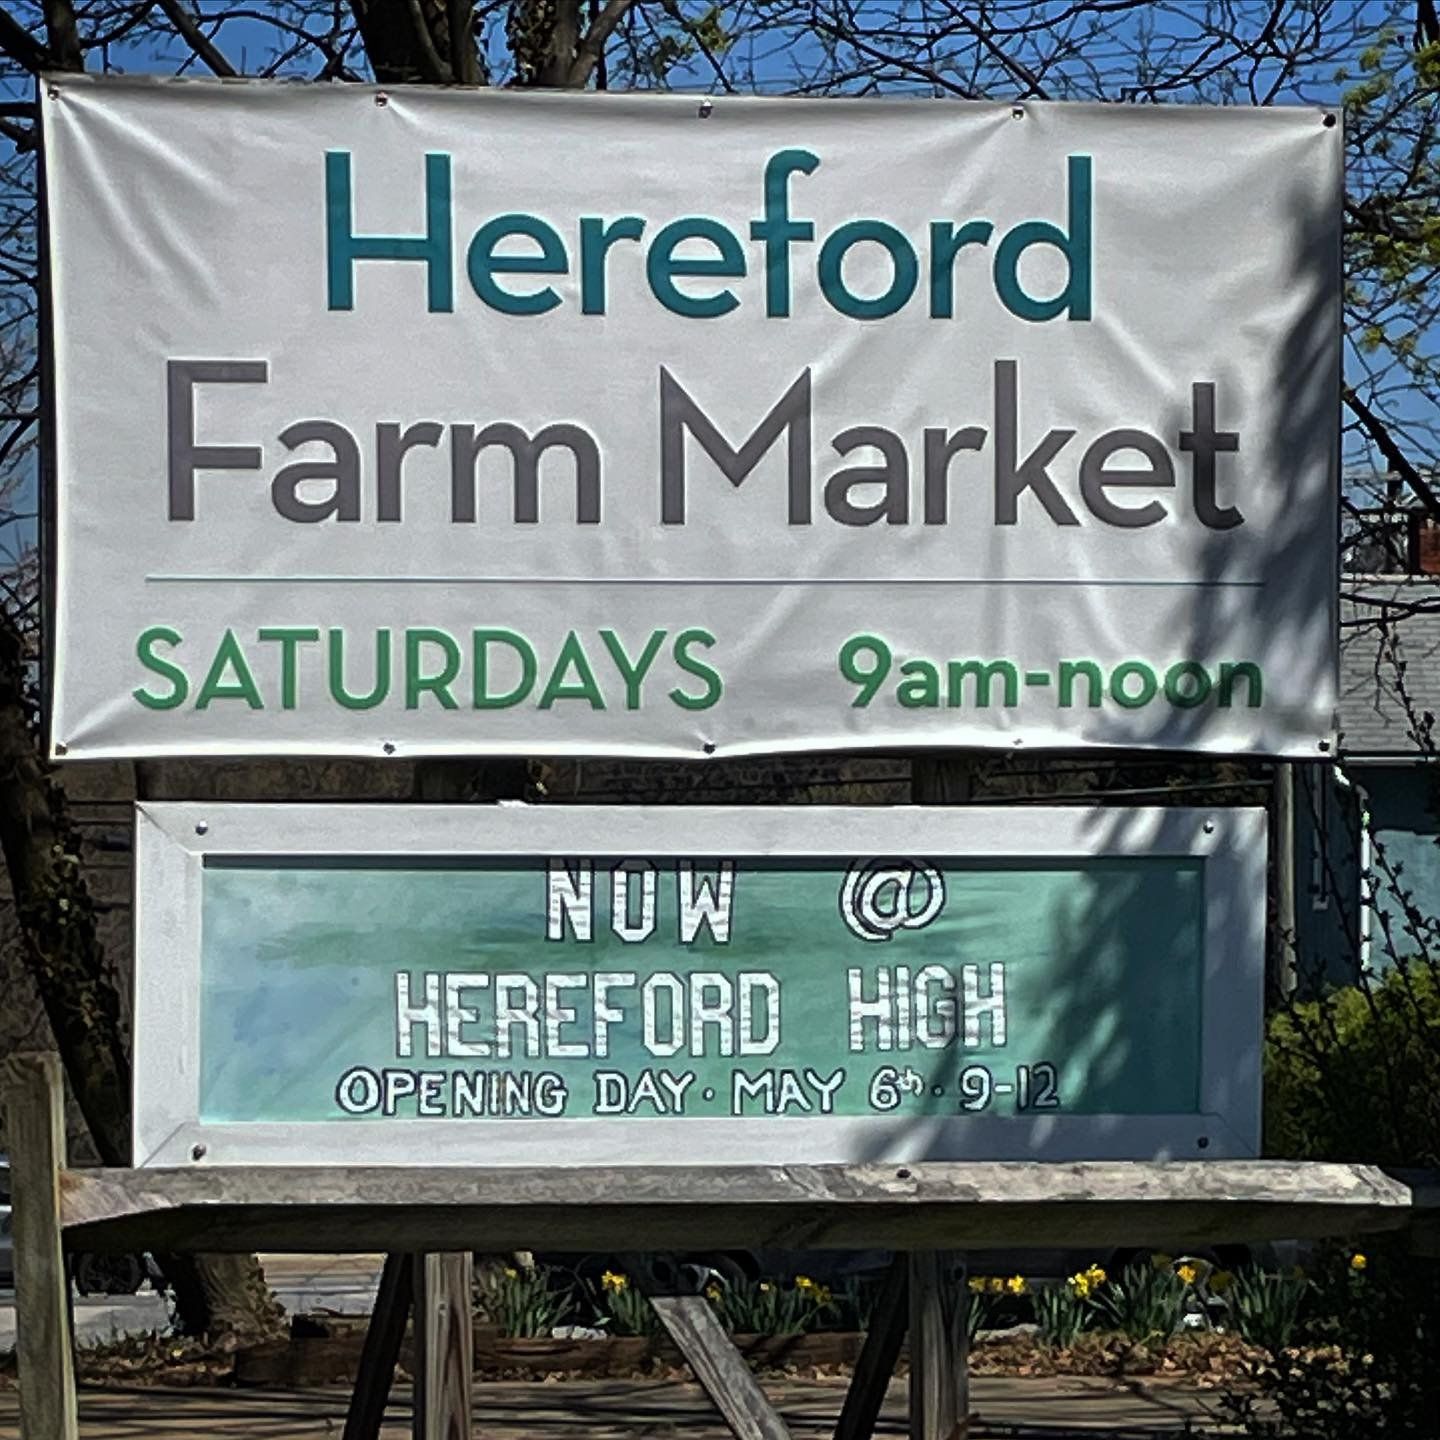 Previous Happening: First Hereford Farmers Market and Spring Share #5!